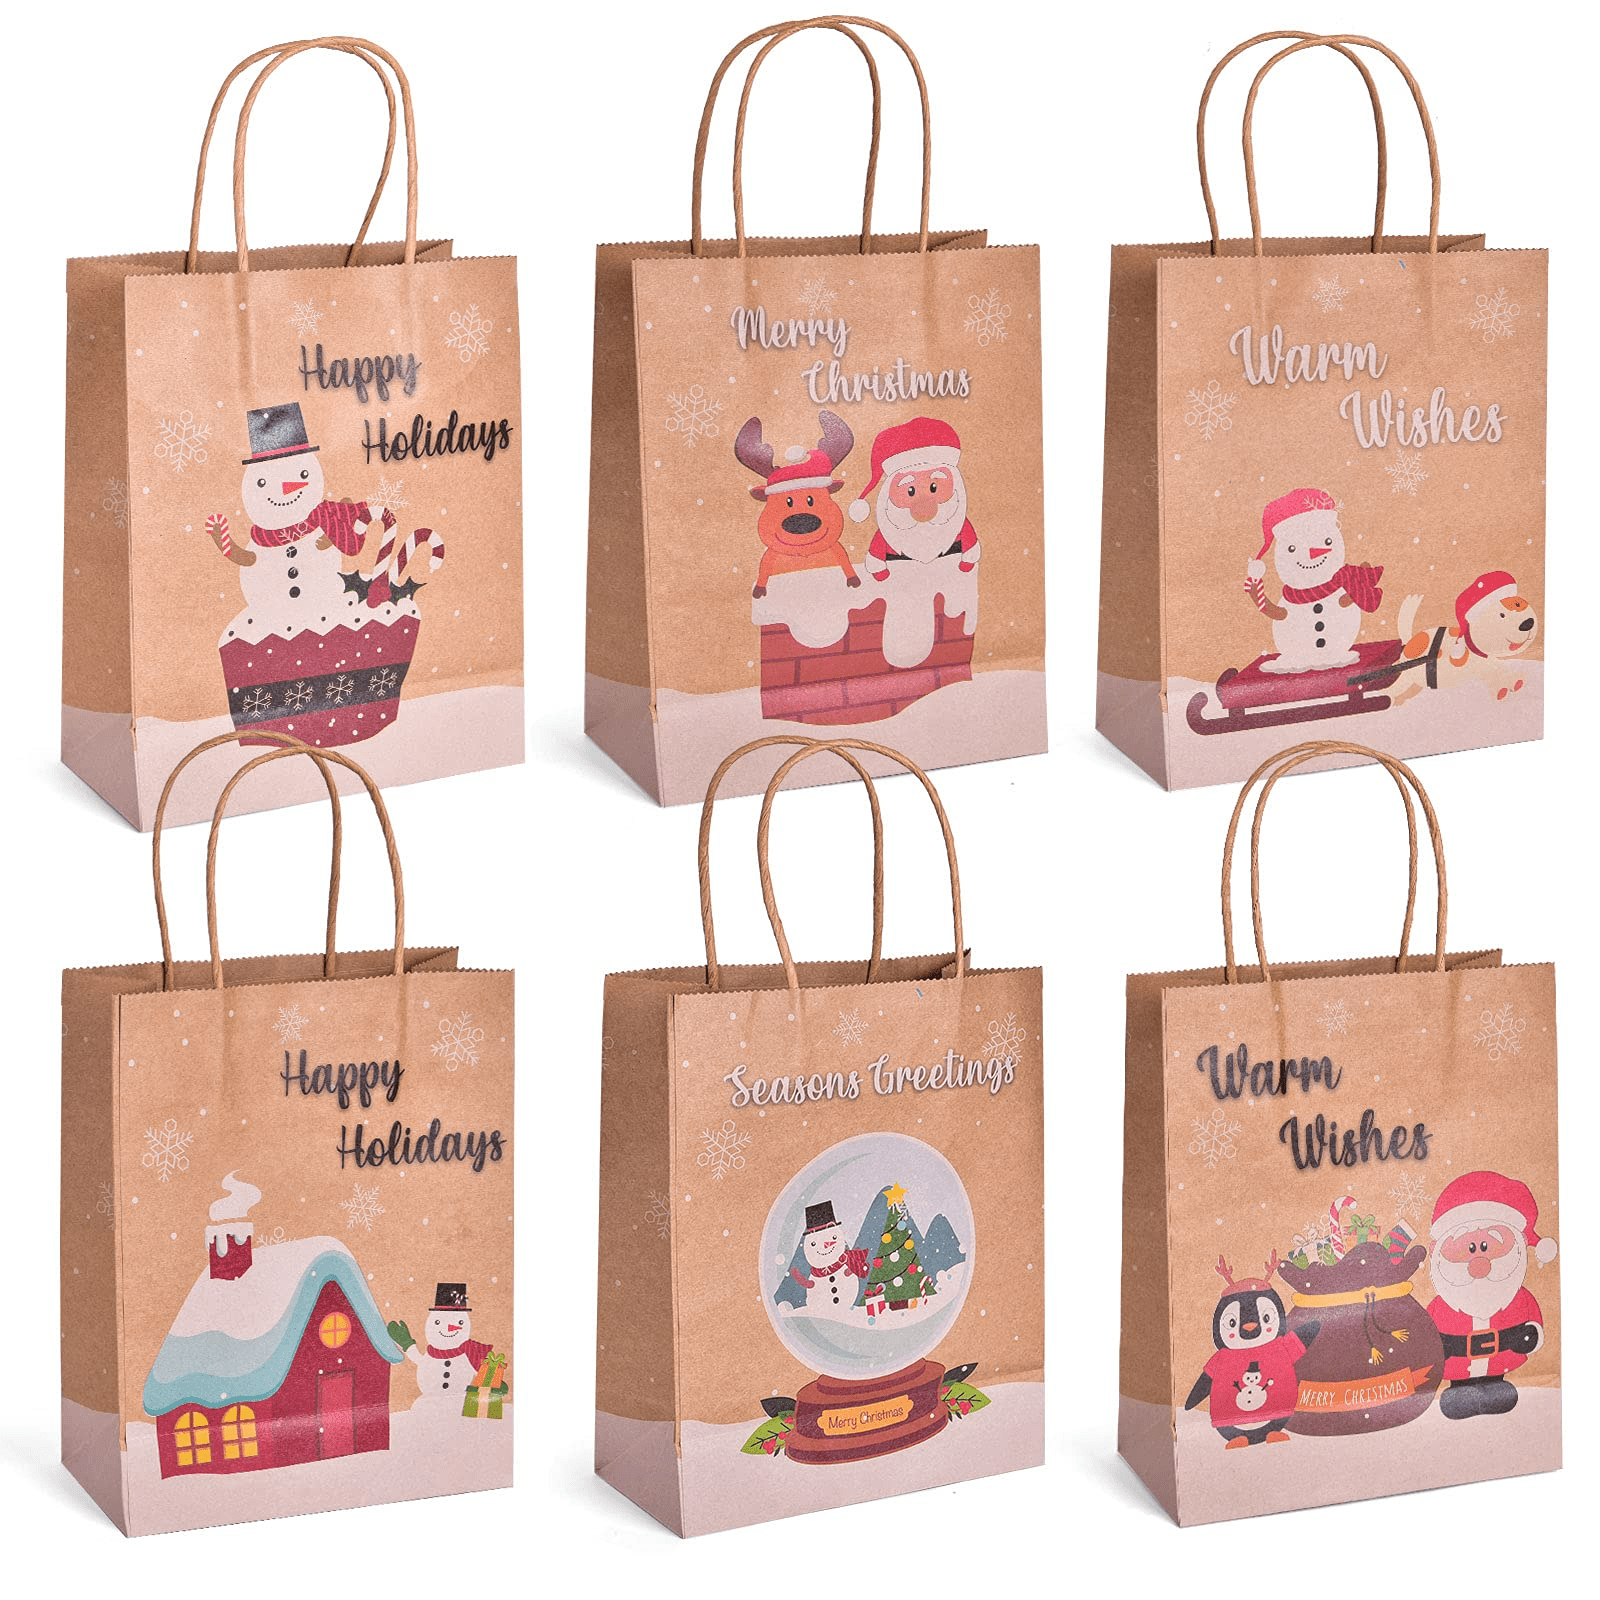 Plum Designs 12 Christmas Gift Bags Bulk- Christmas Gift Bags, Large Christmas  Bags for Gifts, Holiday Gift Bags with Tissue Paper- : Amazon.in: Home &  Kitchen